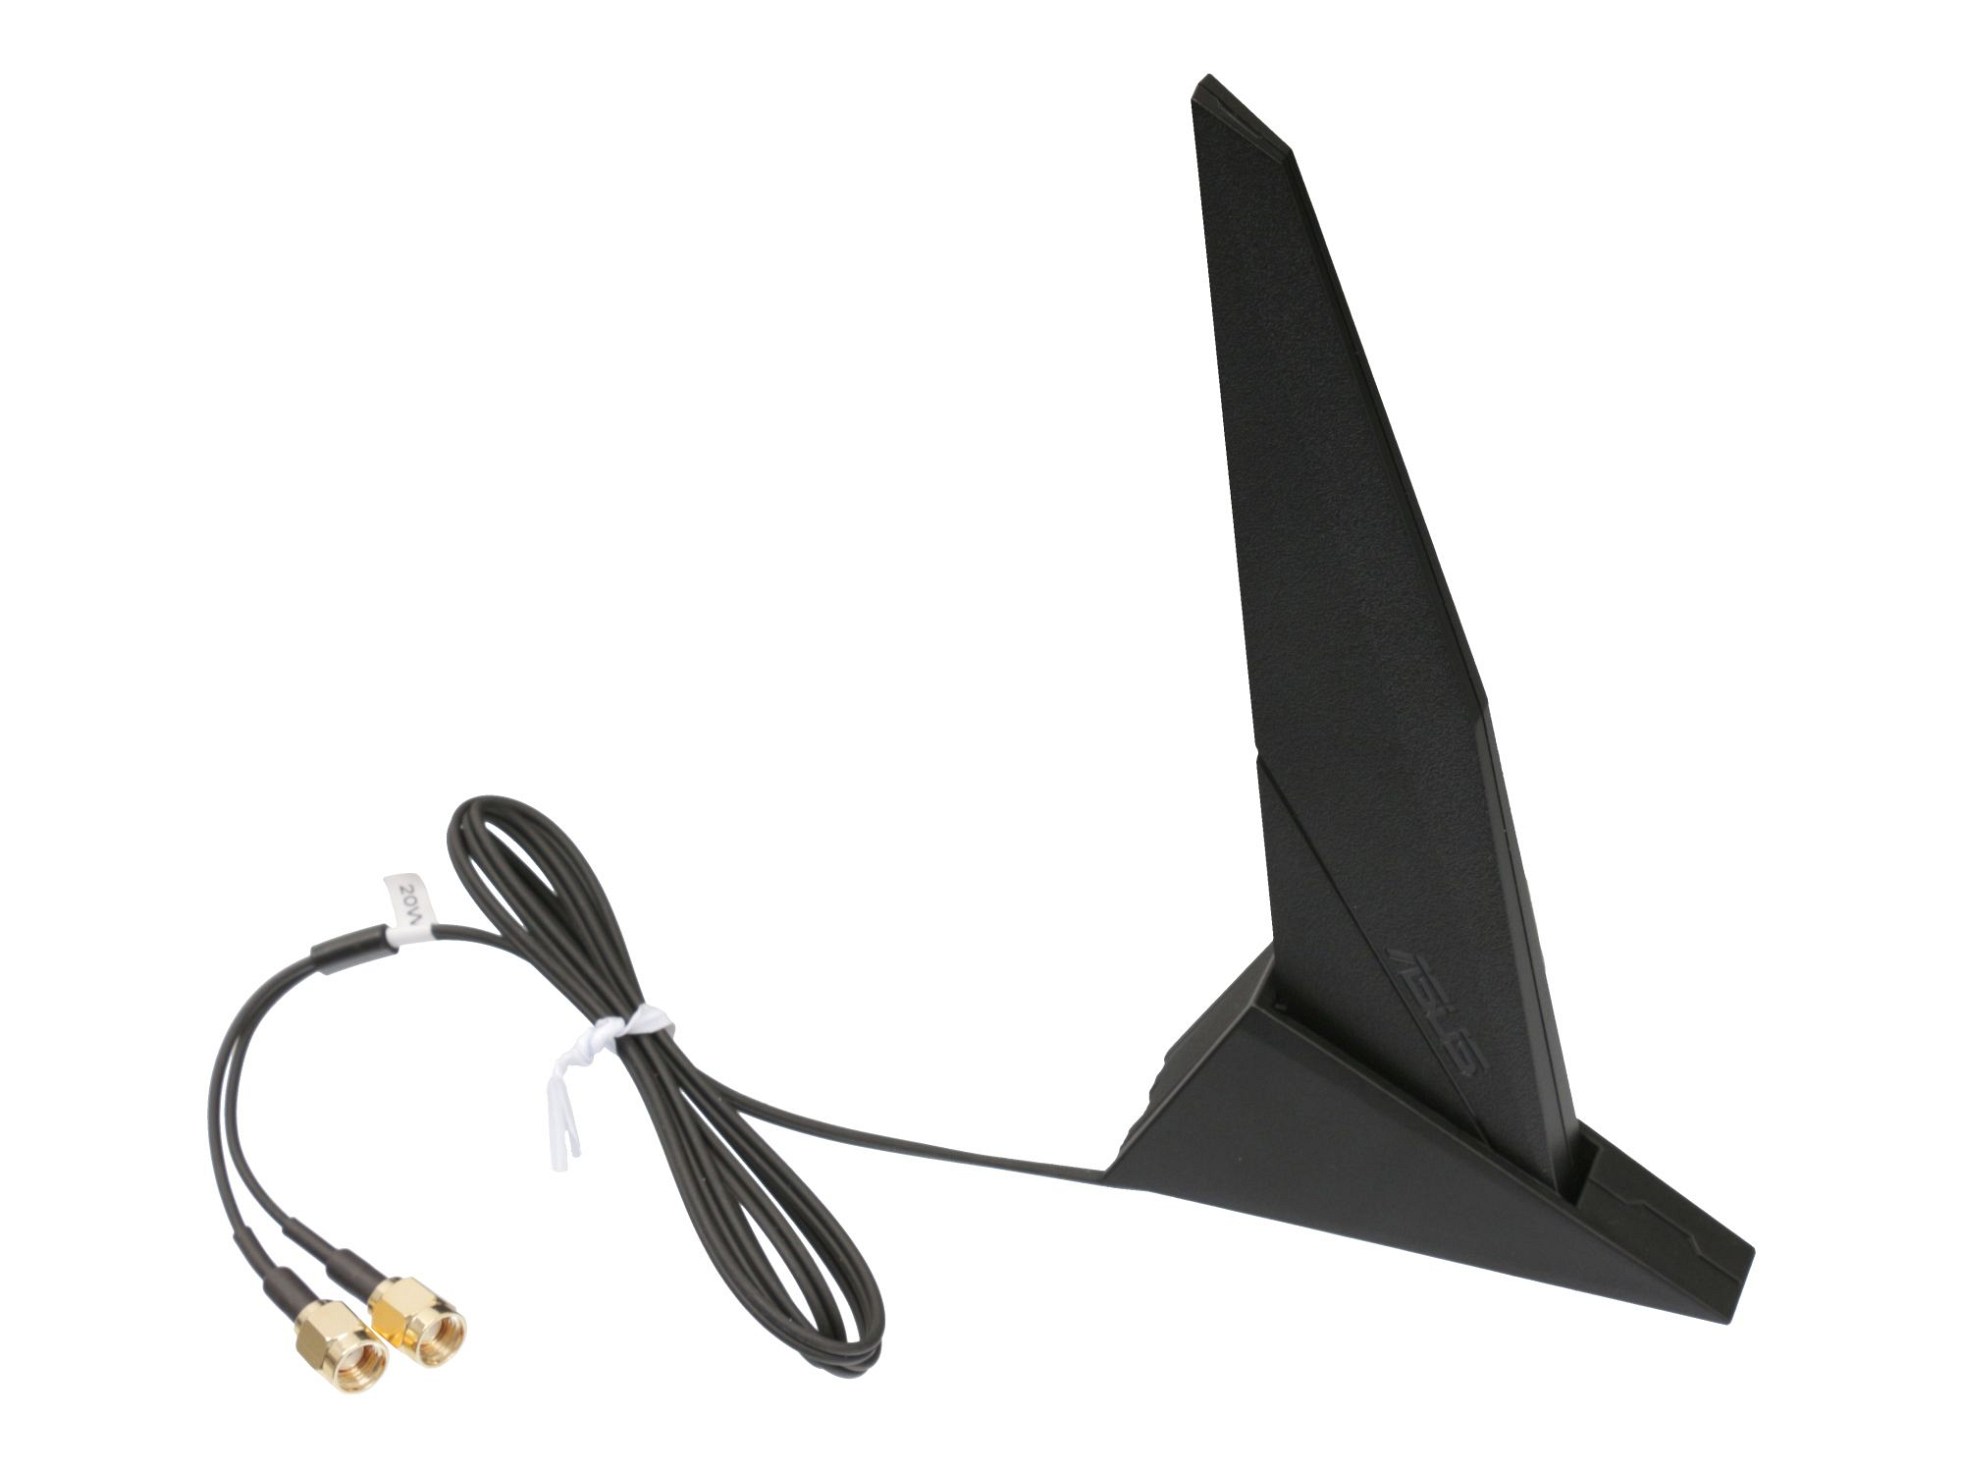 Externe Asus RP-SMA DIPOLE Antenne für Asus ROG MAXIMUS XII EXTREME